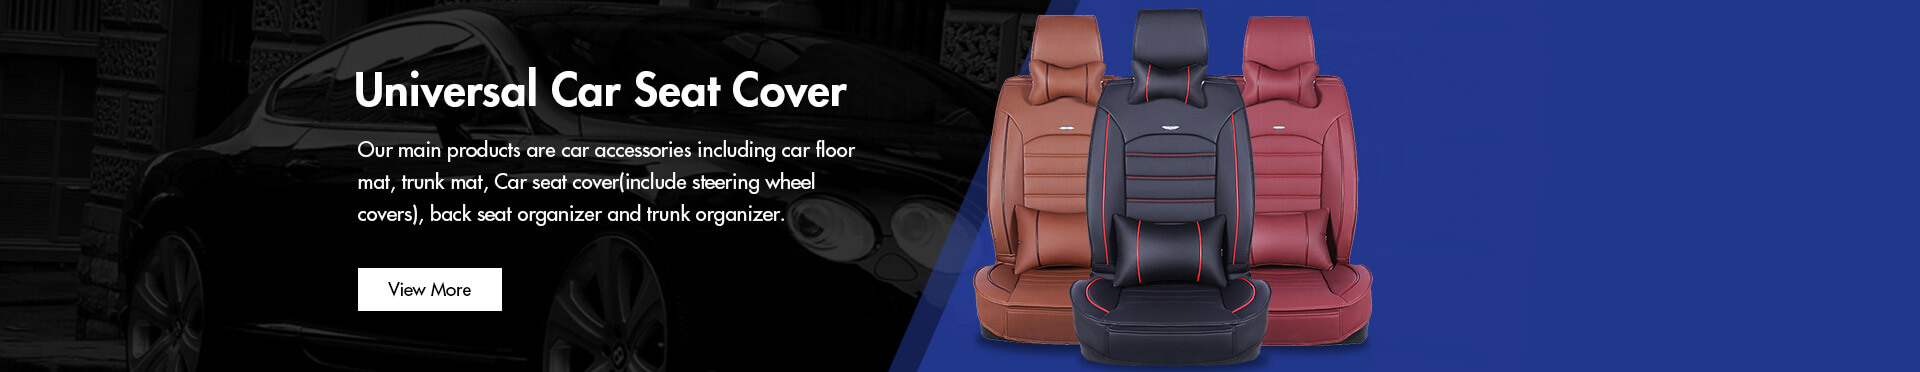 universal car seat cover